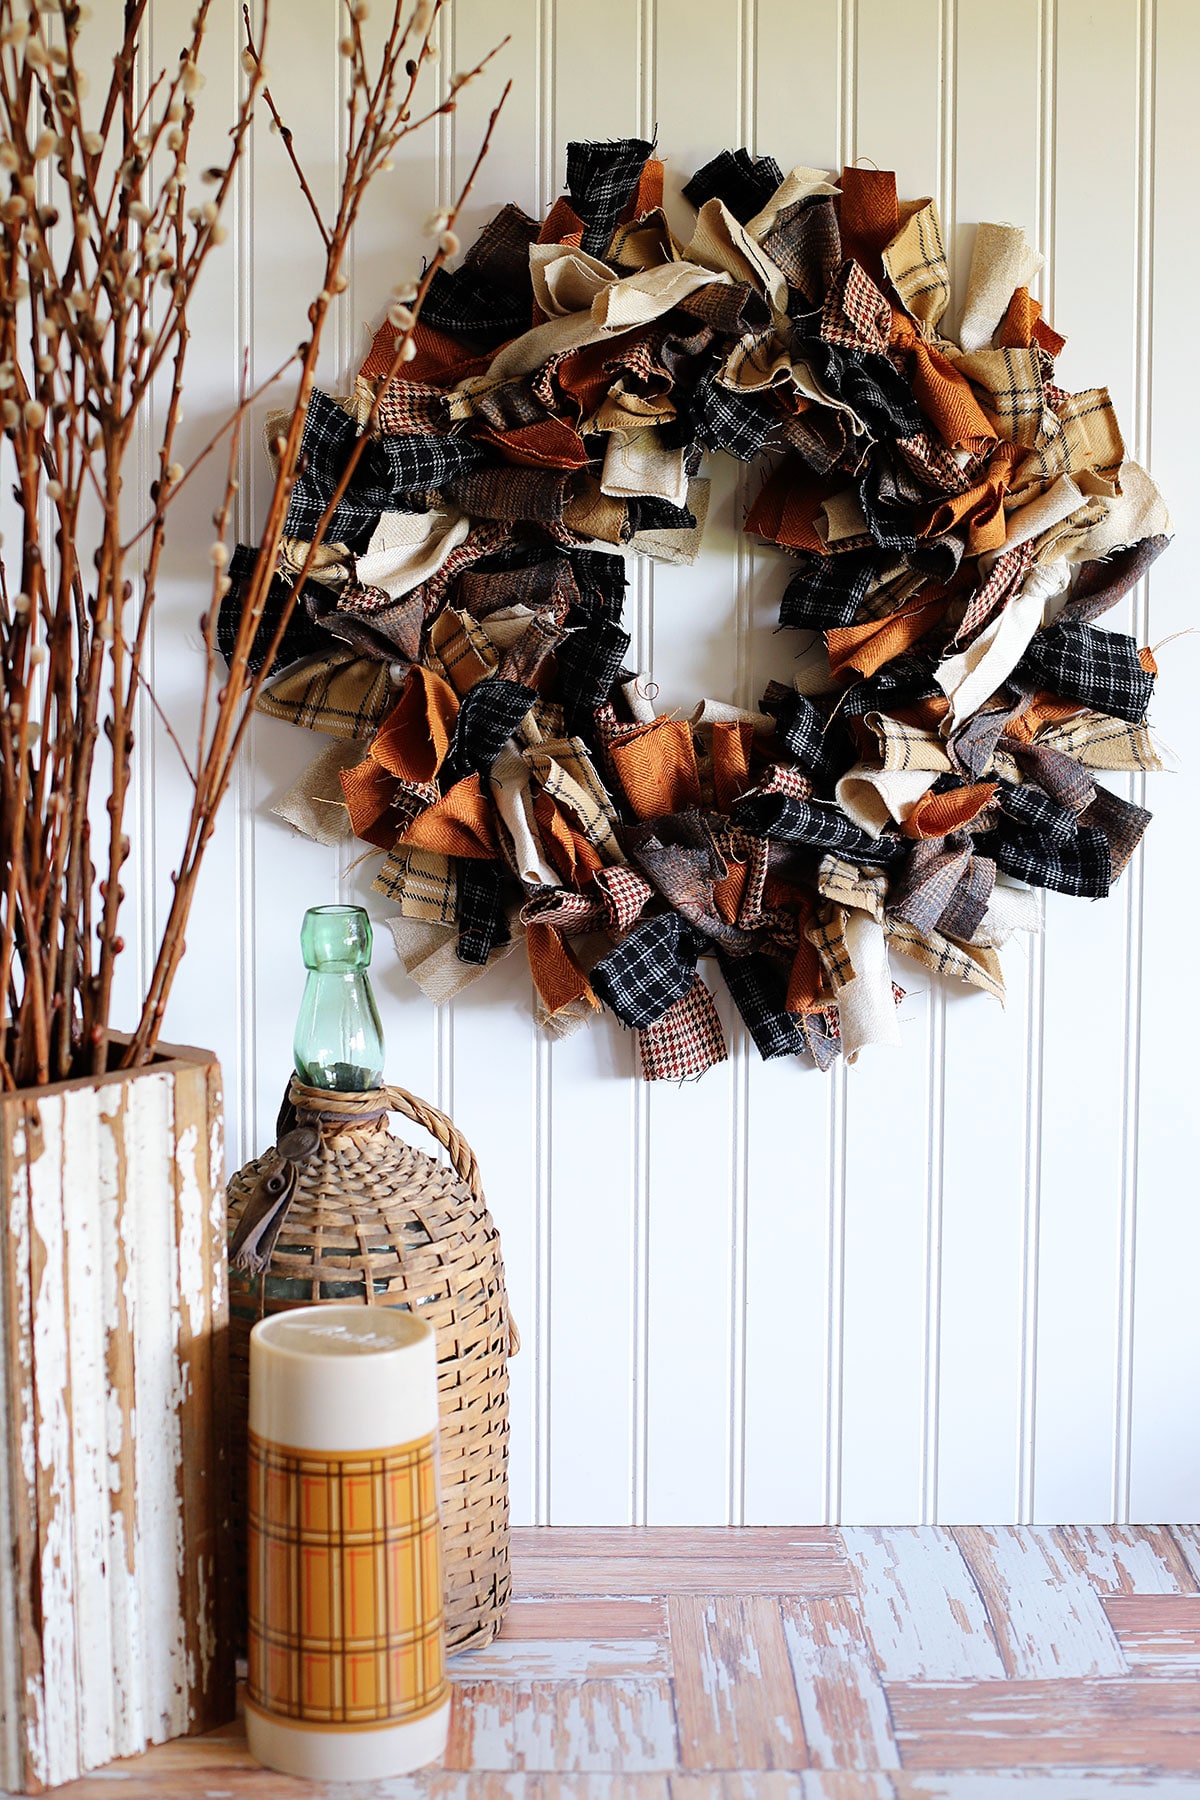 Tutorial for making a rag wreath - showing a rag wreath hanging on the wall next to a wooden vase of twigs, old wicker covered wine bottle and a brown thermos.